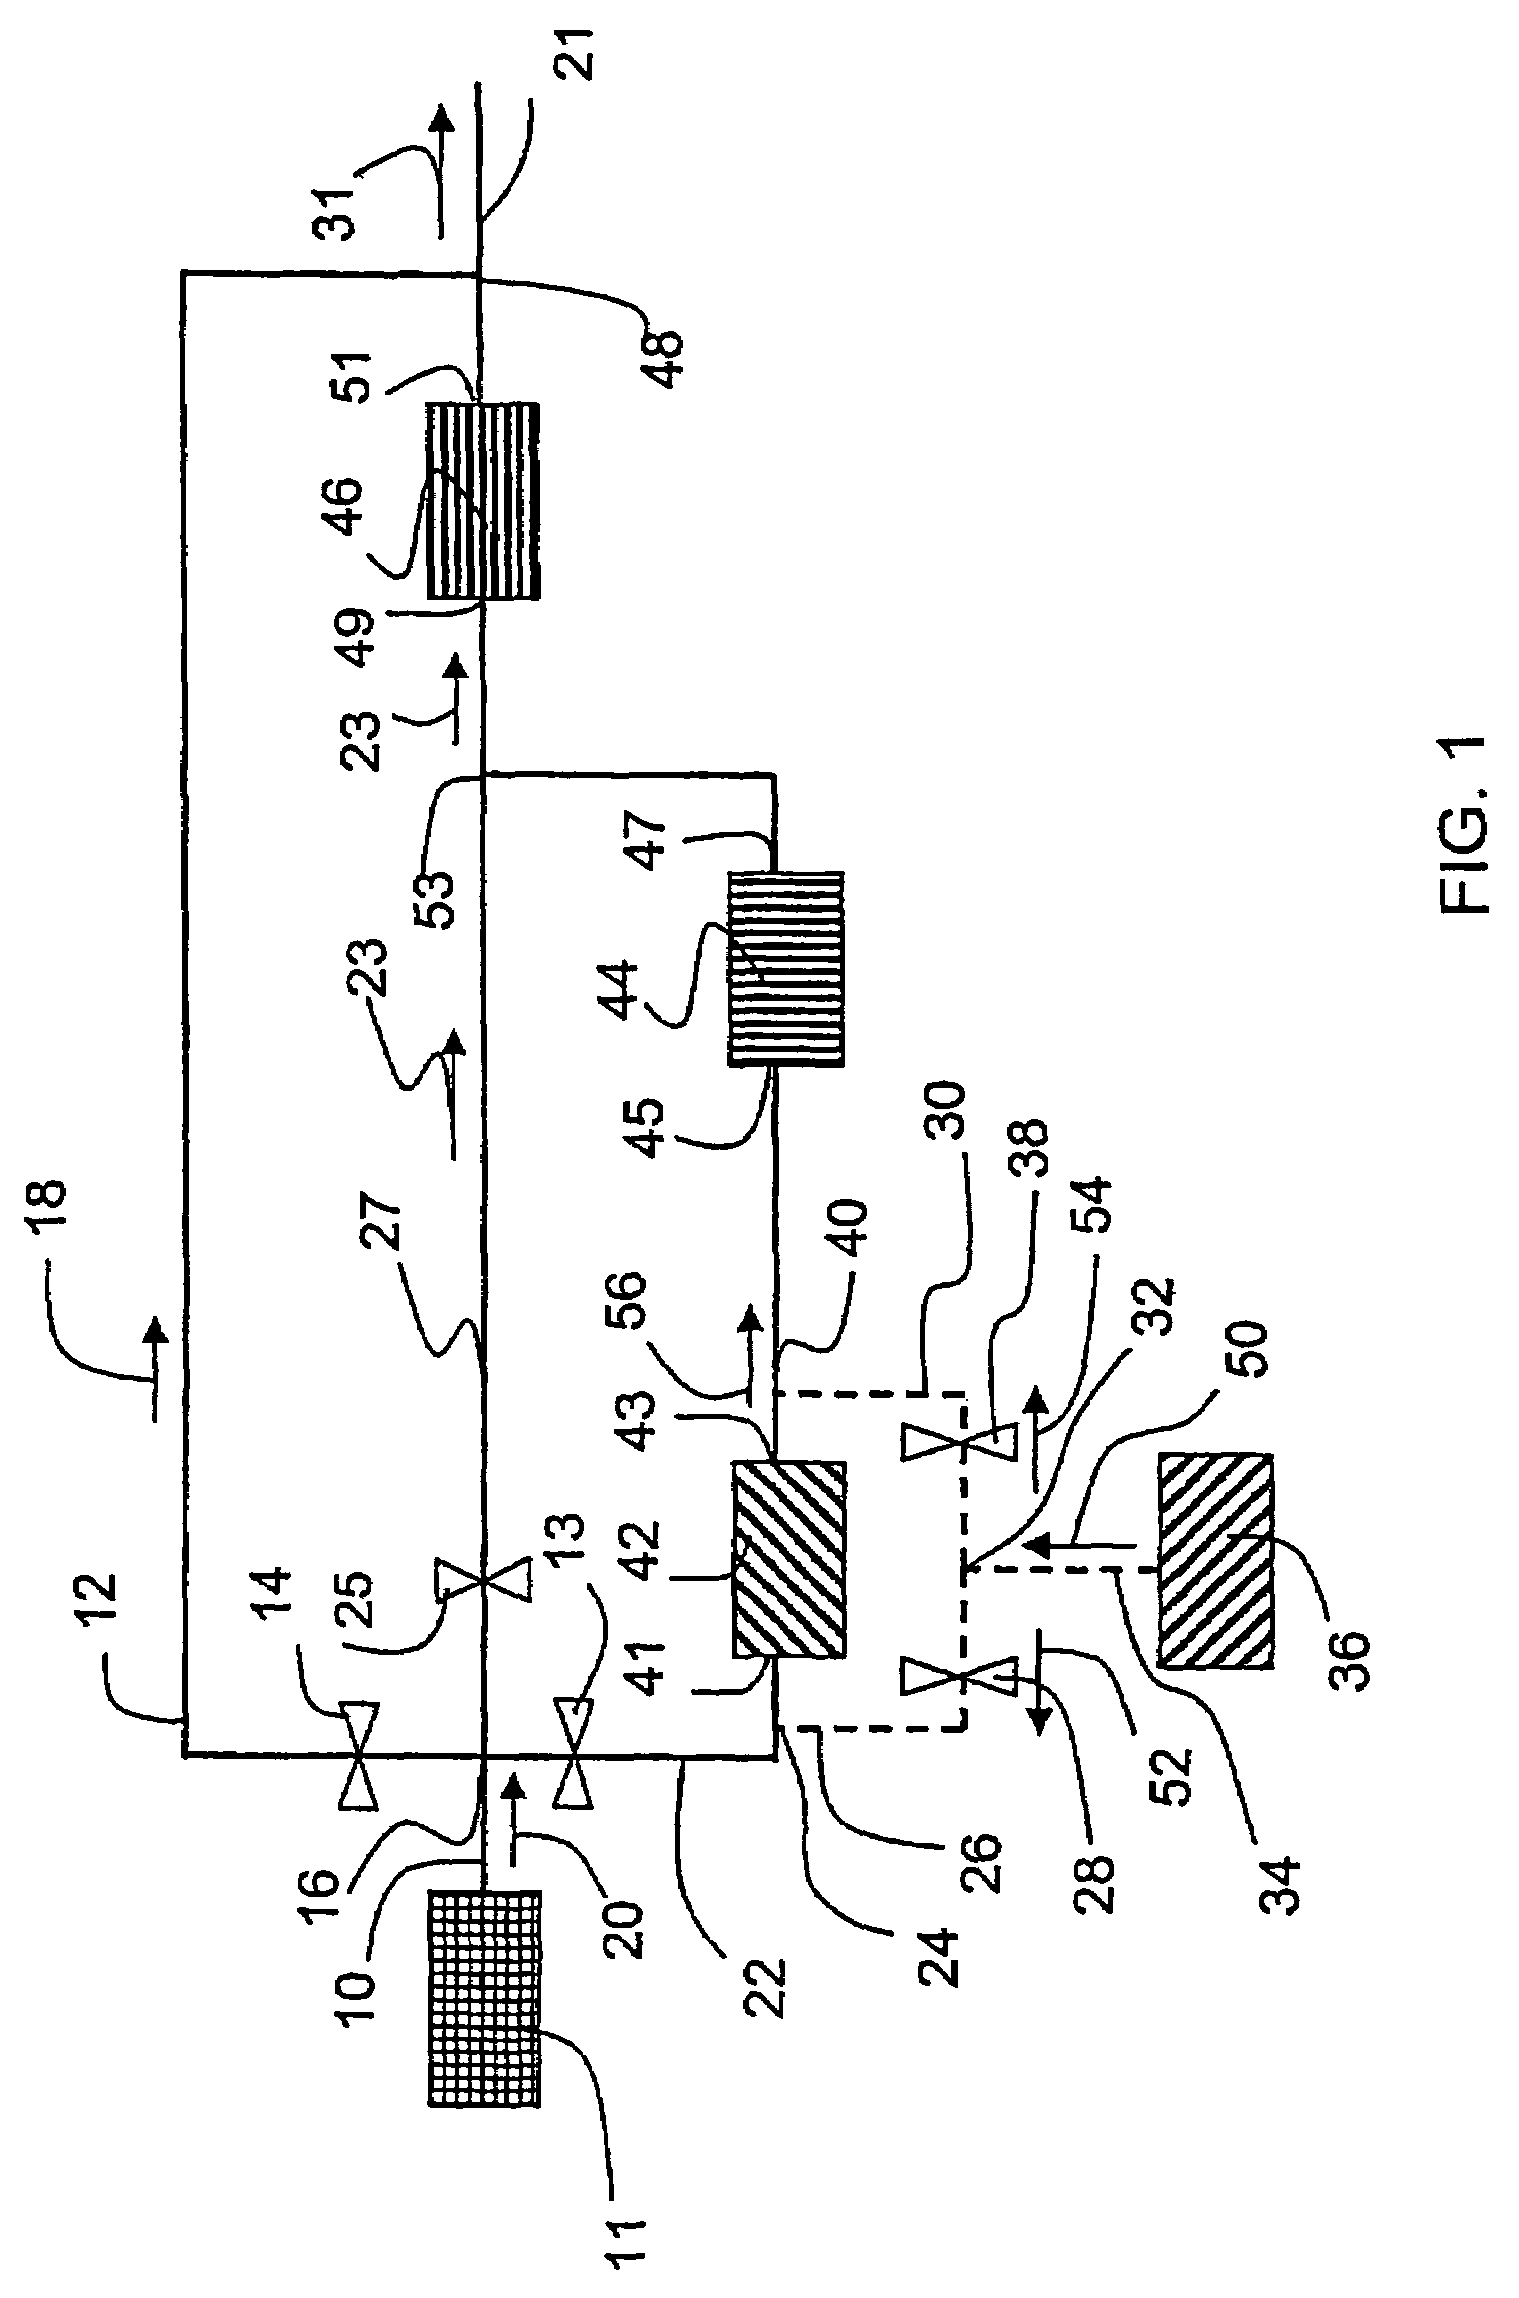 Method and apparatus for regenerating NOx adsorbers